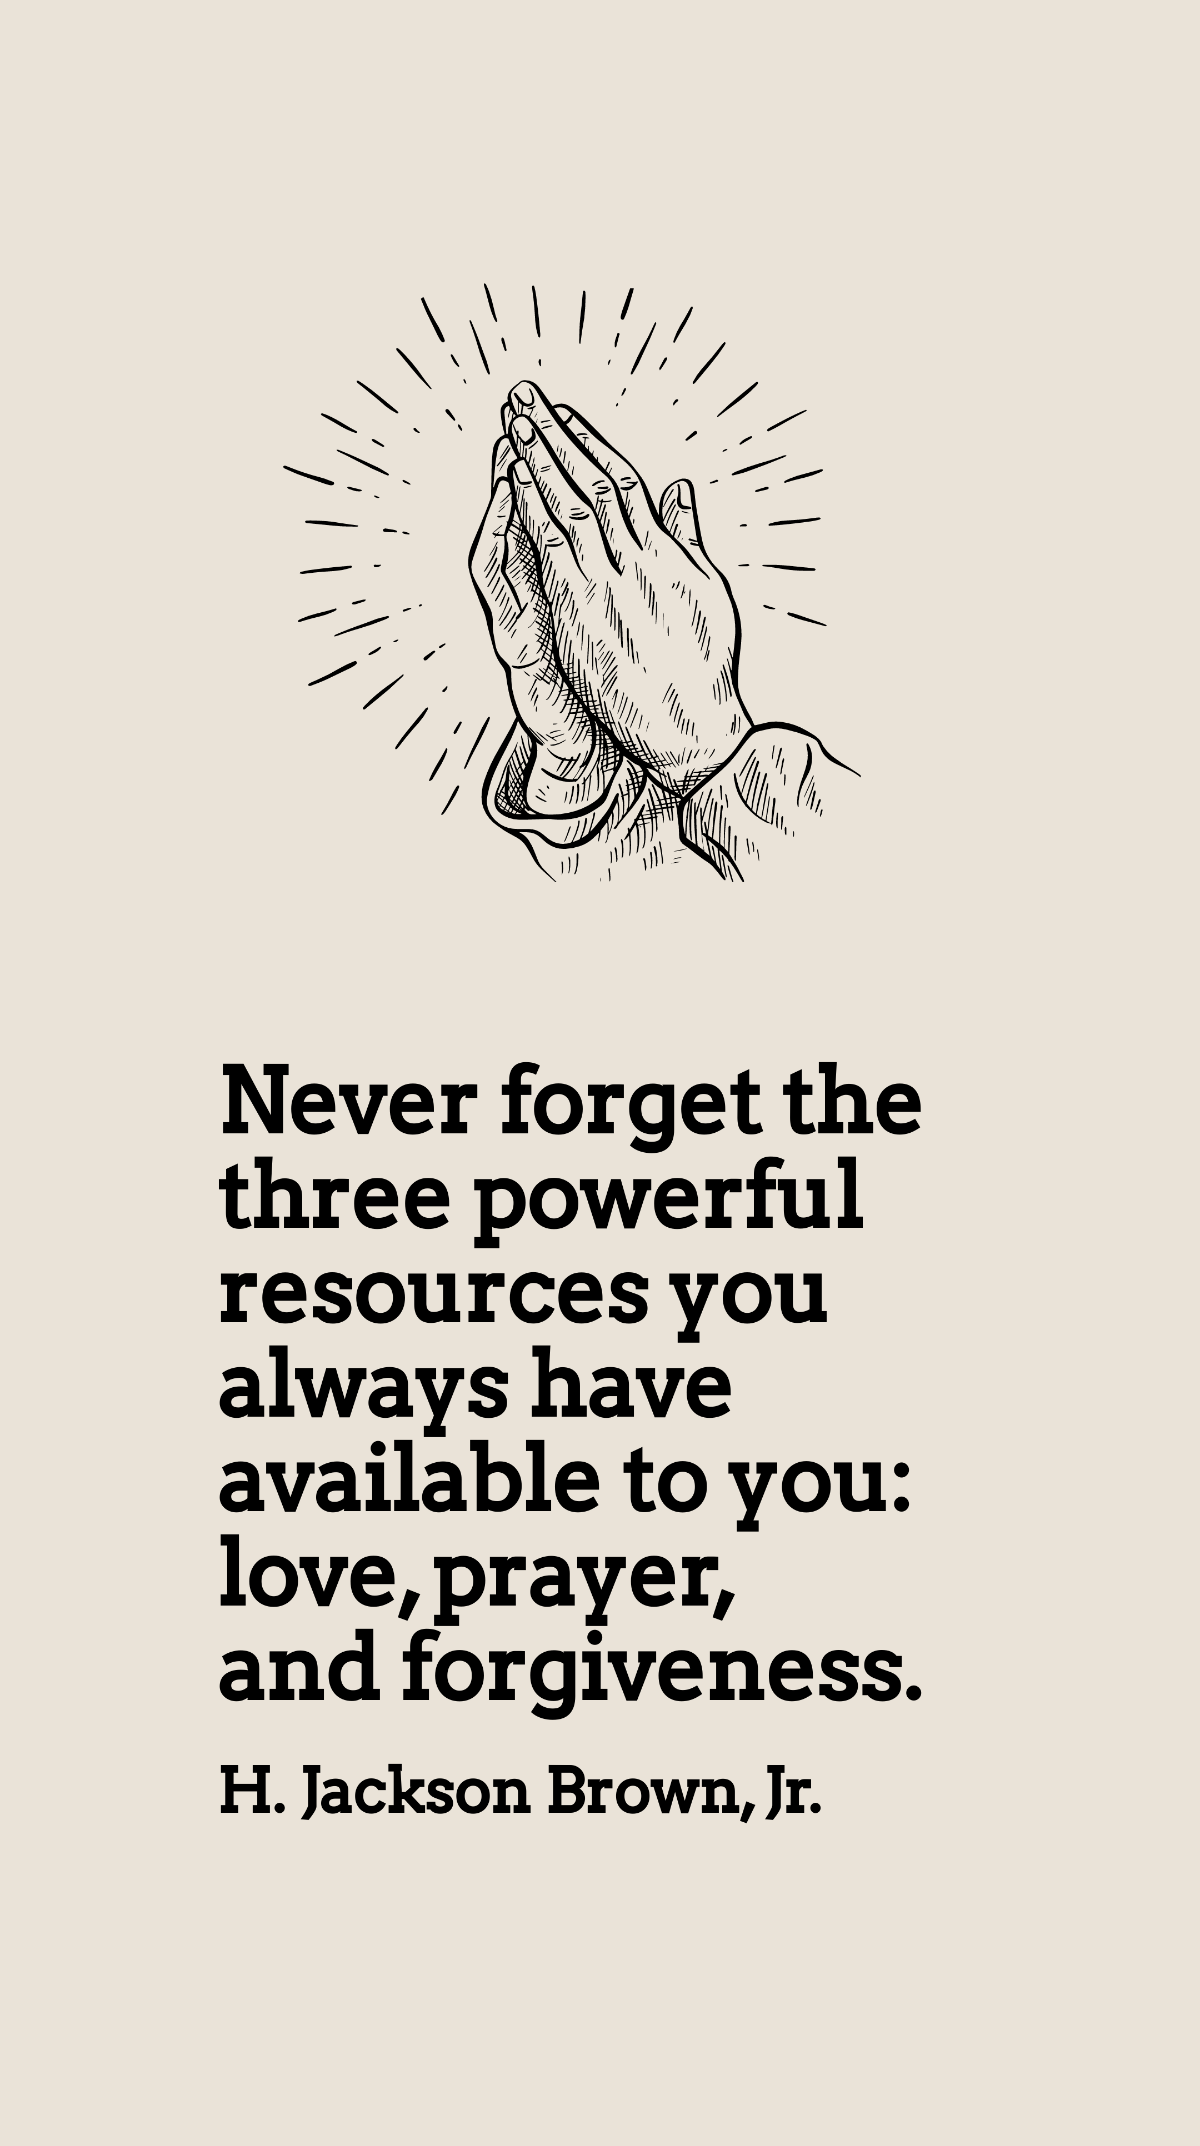 H. Jackson Brown, Jr. - Never forget the three powerful resources you always have available to you: love, prayer, and forgiveness.